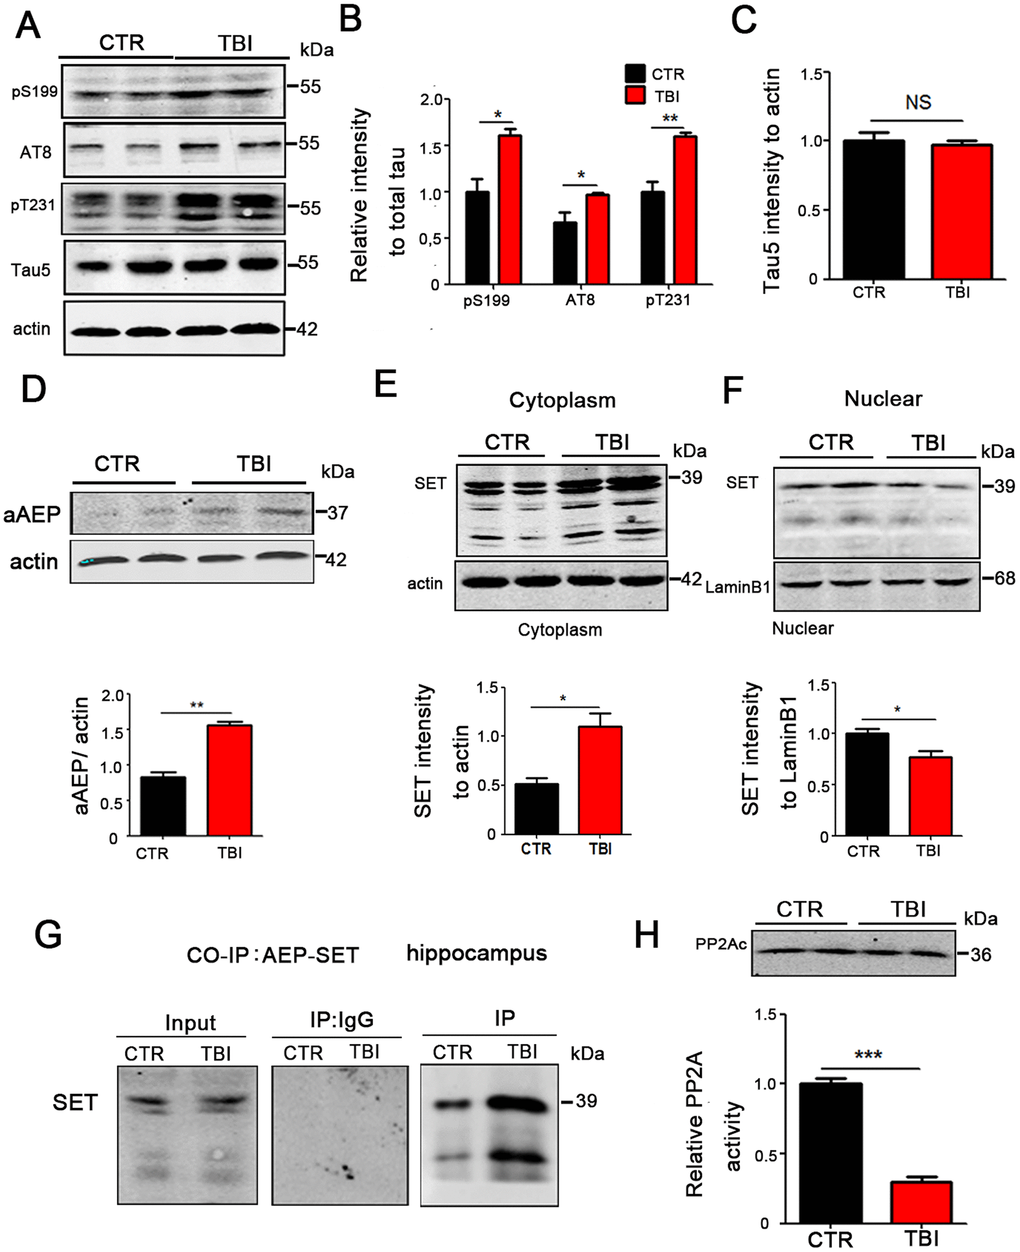 TBI caused tau hyperphosphorylation and cytoplasmic retention of SET accompanied by AEP activation. (A–C) Hippocampal tissues were homogenized, and tau protein levels of pS199, pS202/pT205 (AT8), pT231 were detected by immunoblotting (A, B). Total tau level was measured (C) with actin as loading control. (D) aAEP (molecular weight at 36KD) was measured by immunoblotting. (E, F) We separate cytosolic and nuclear proteins: SET in cytoplasm (E) and in nuclei (F) were measured. (G) The interaction of AEP and SET was evaluated by Co-IP. (H) Hippocampal PP2A level and activity were tested. n=3. p value significance is calculated from a one-way ANOVA, data are represented as mean ± SEM. *p p p vs control group.